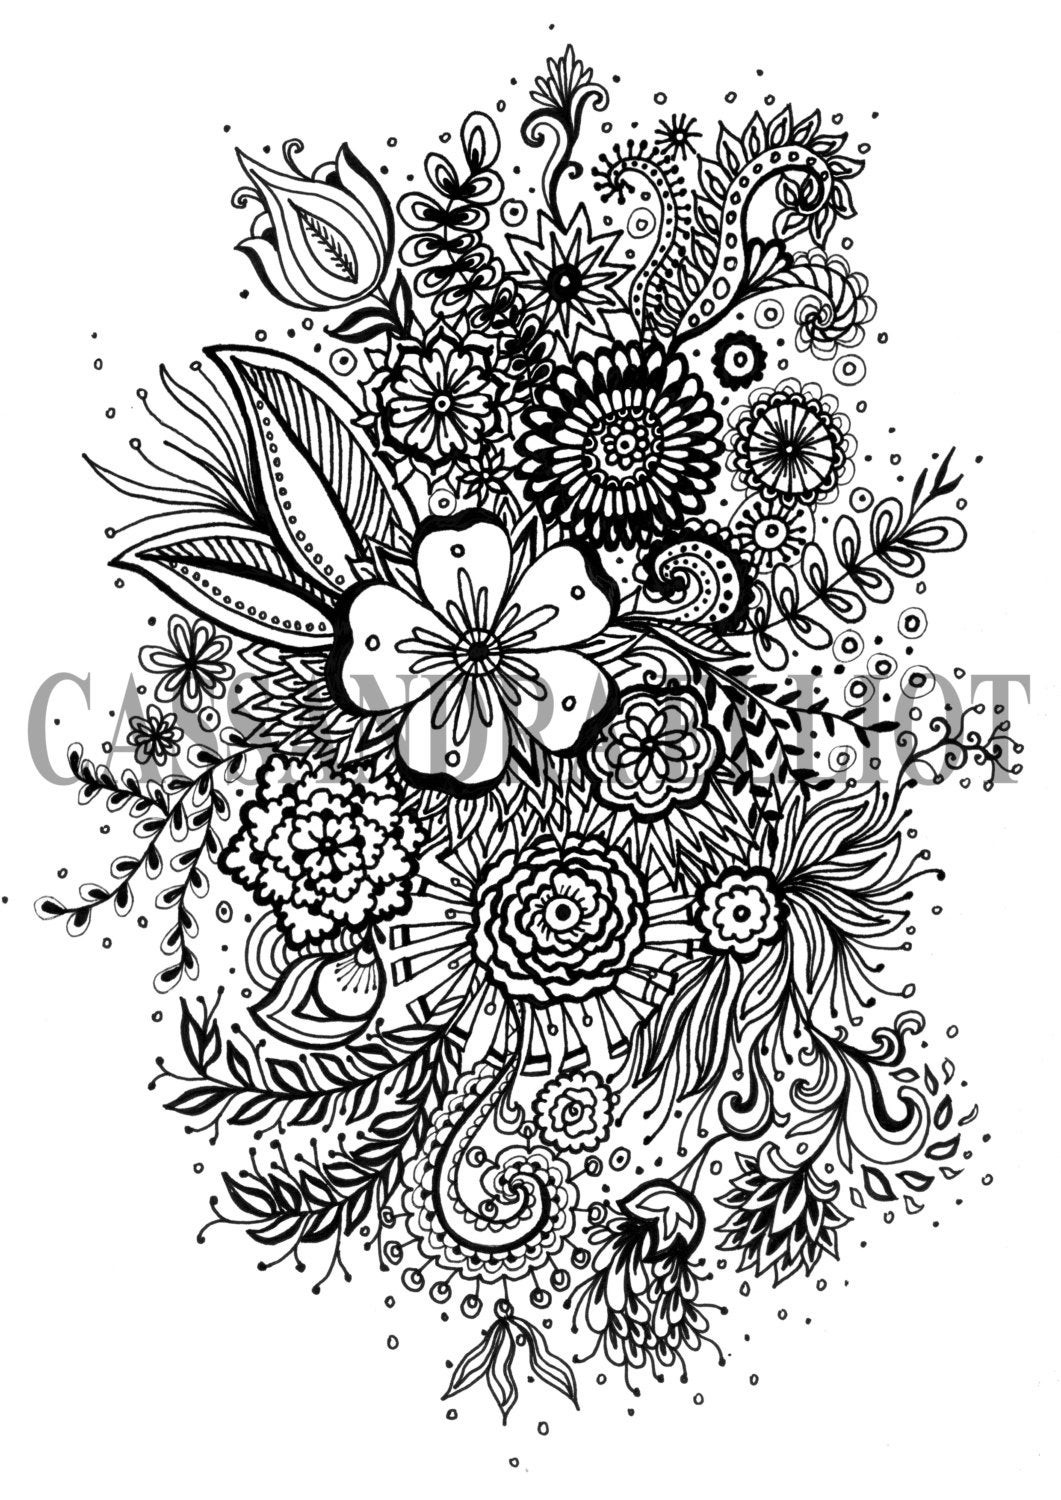 Coloring Pages For Adults Patterns
 Printable Adult Colouring Page Digital Download Print Flower